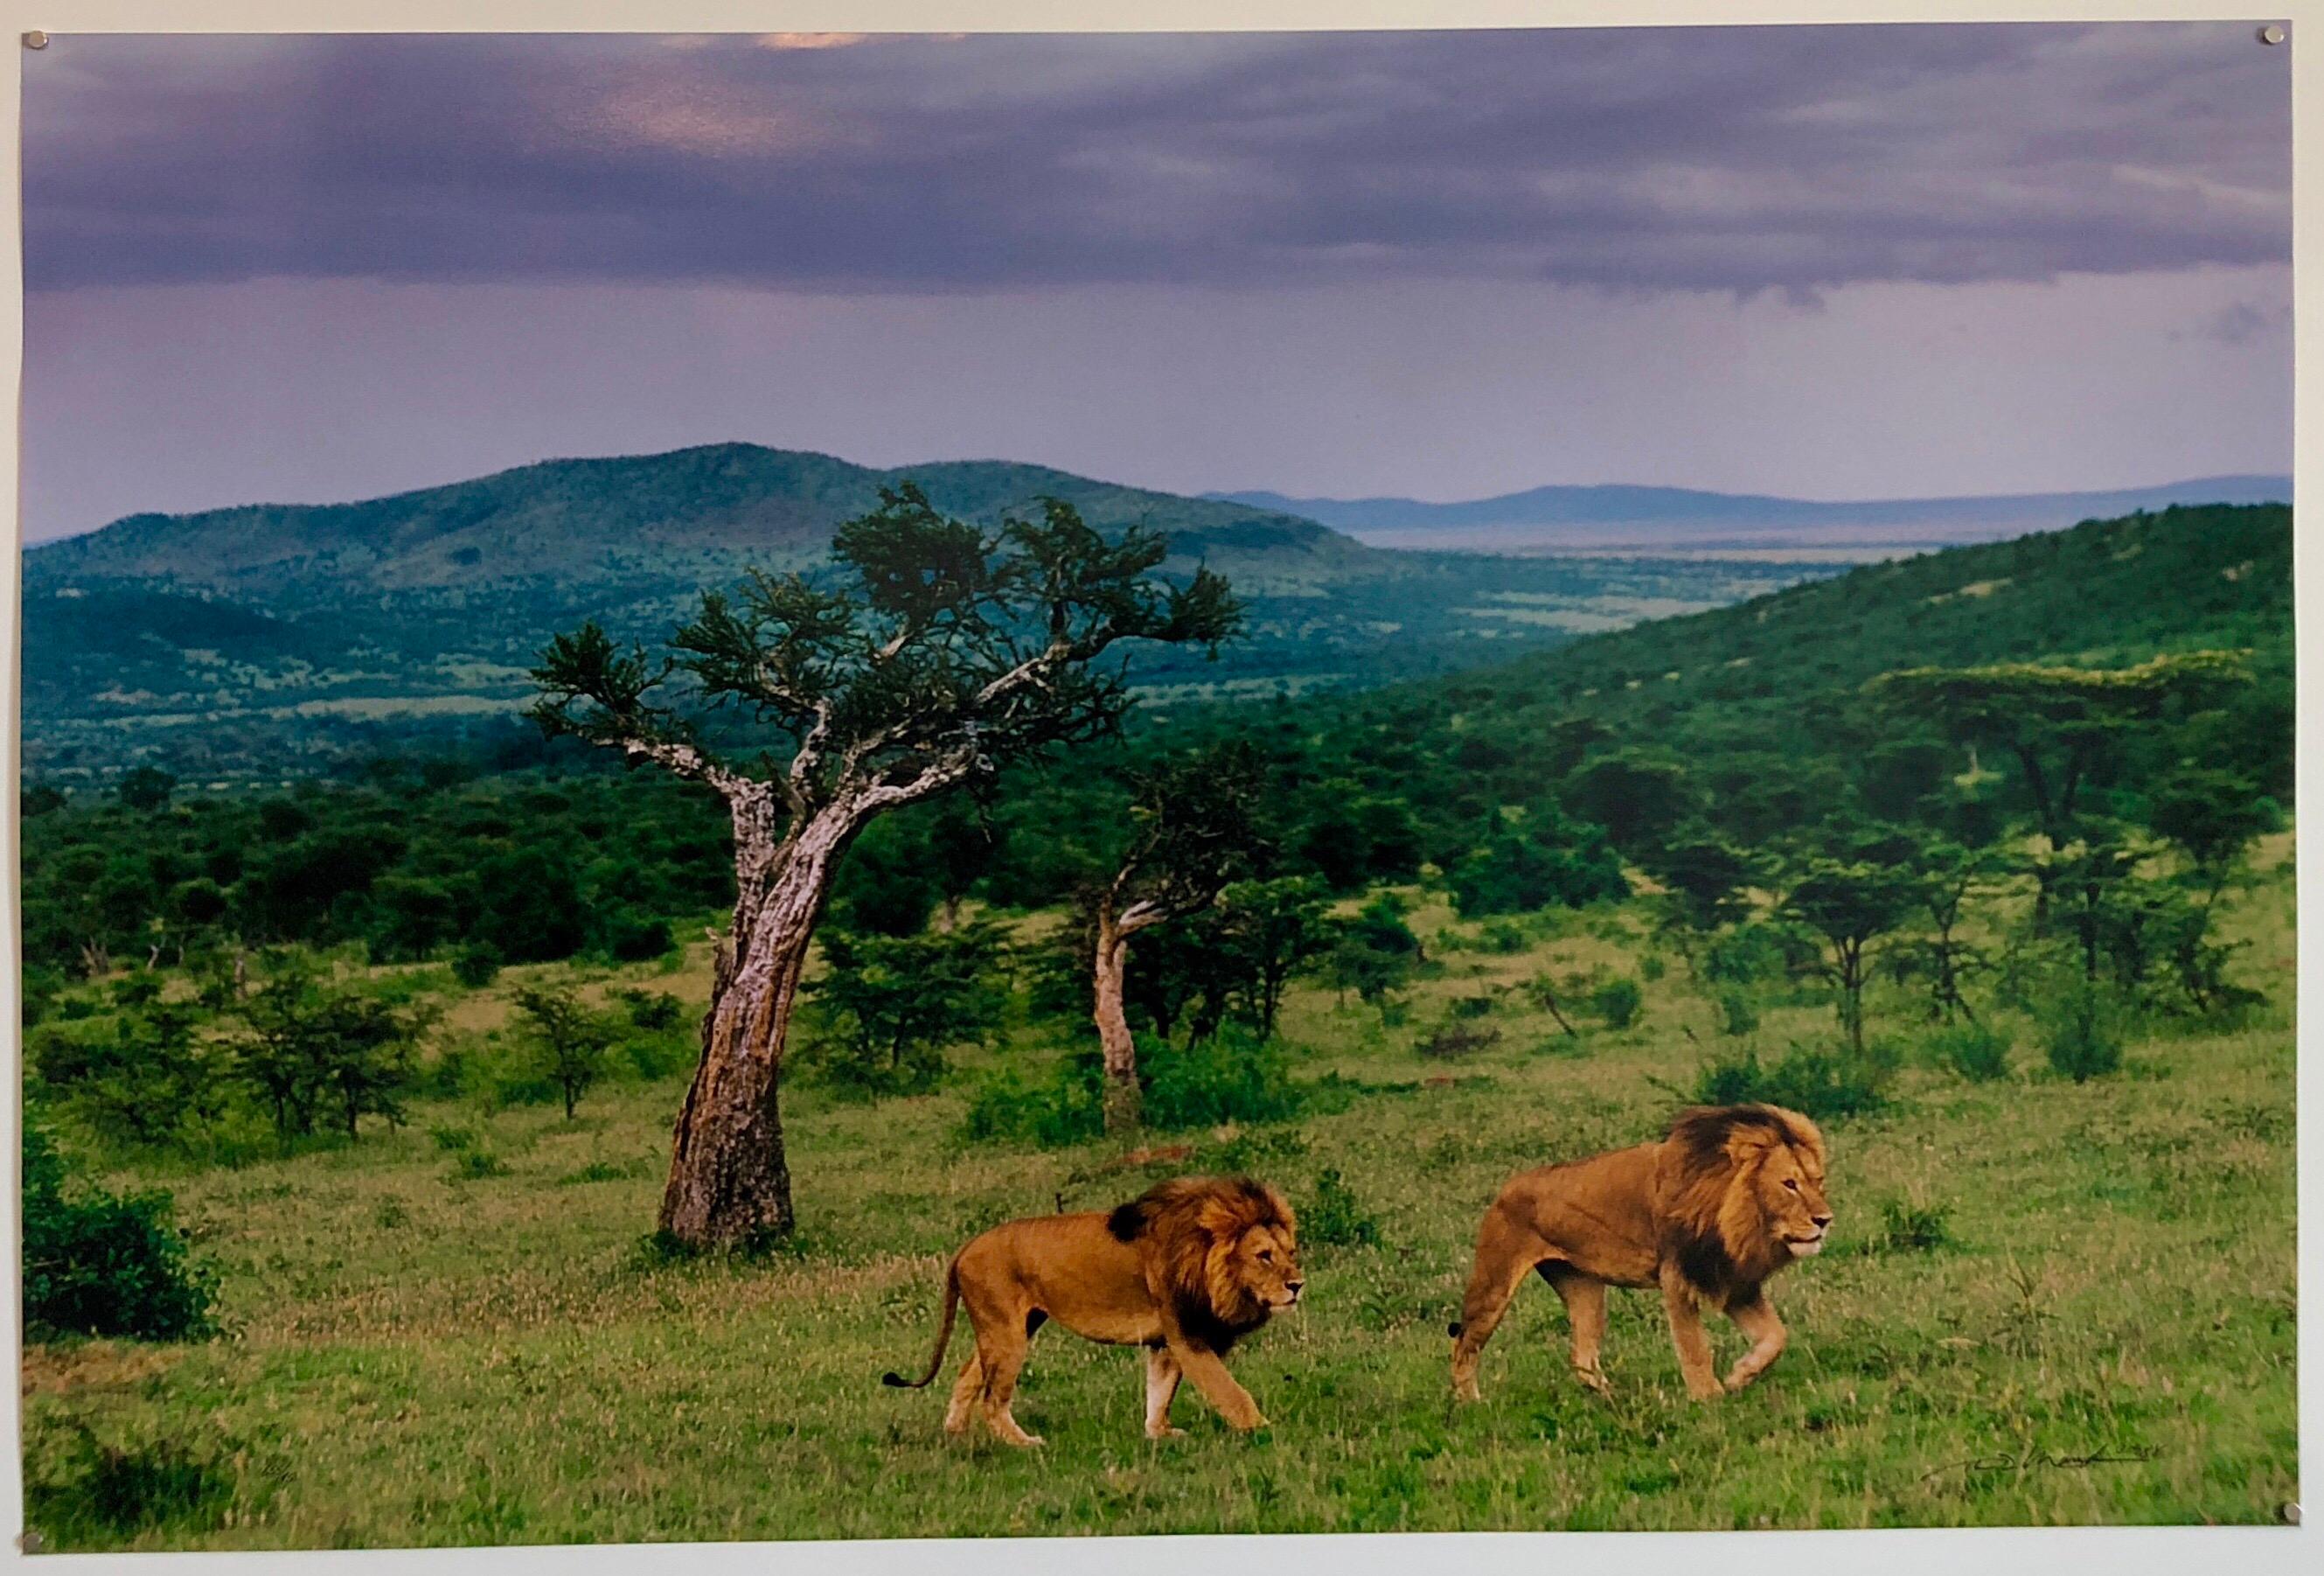 Before the Storm - Lions
Maasai Mara, Kenya
Limited Edition of 950  Artist Proof 95 (SOLD OUT, out of print rare edition)
With rain threatening in the distance, male lions search for the rest of the pride. The dramatic landscape of Maasai Mara,